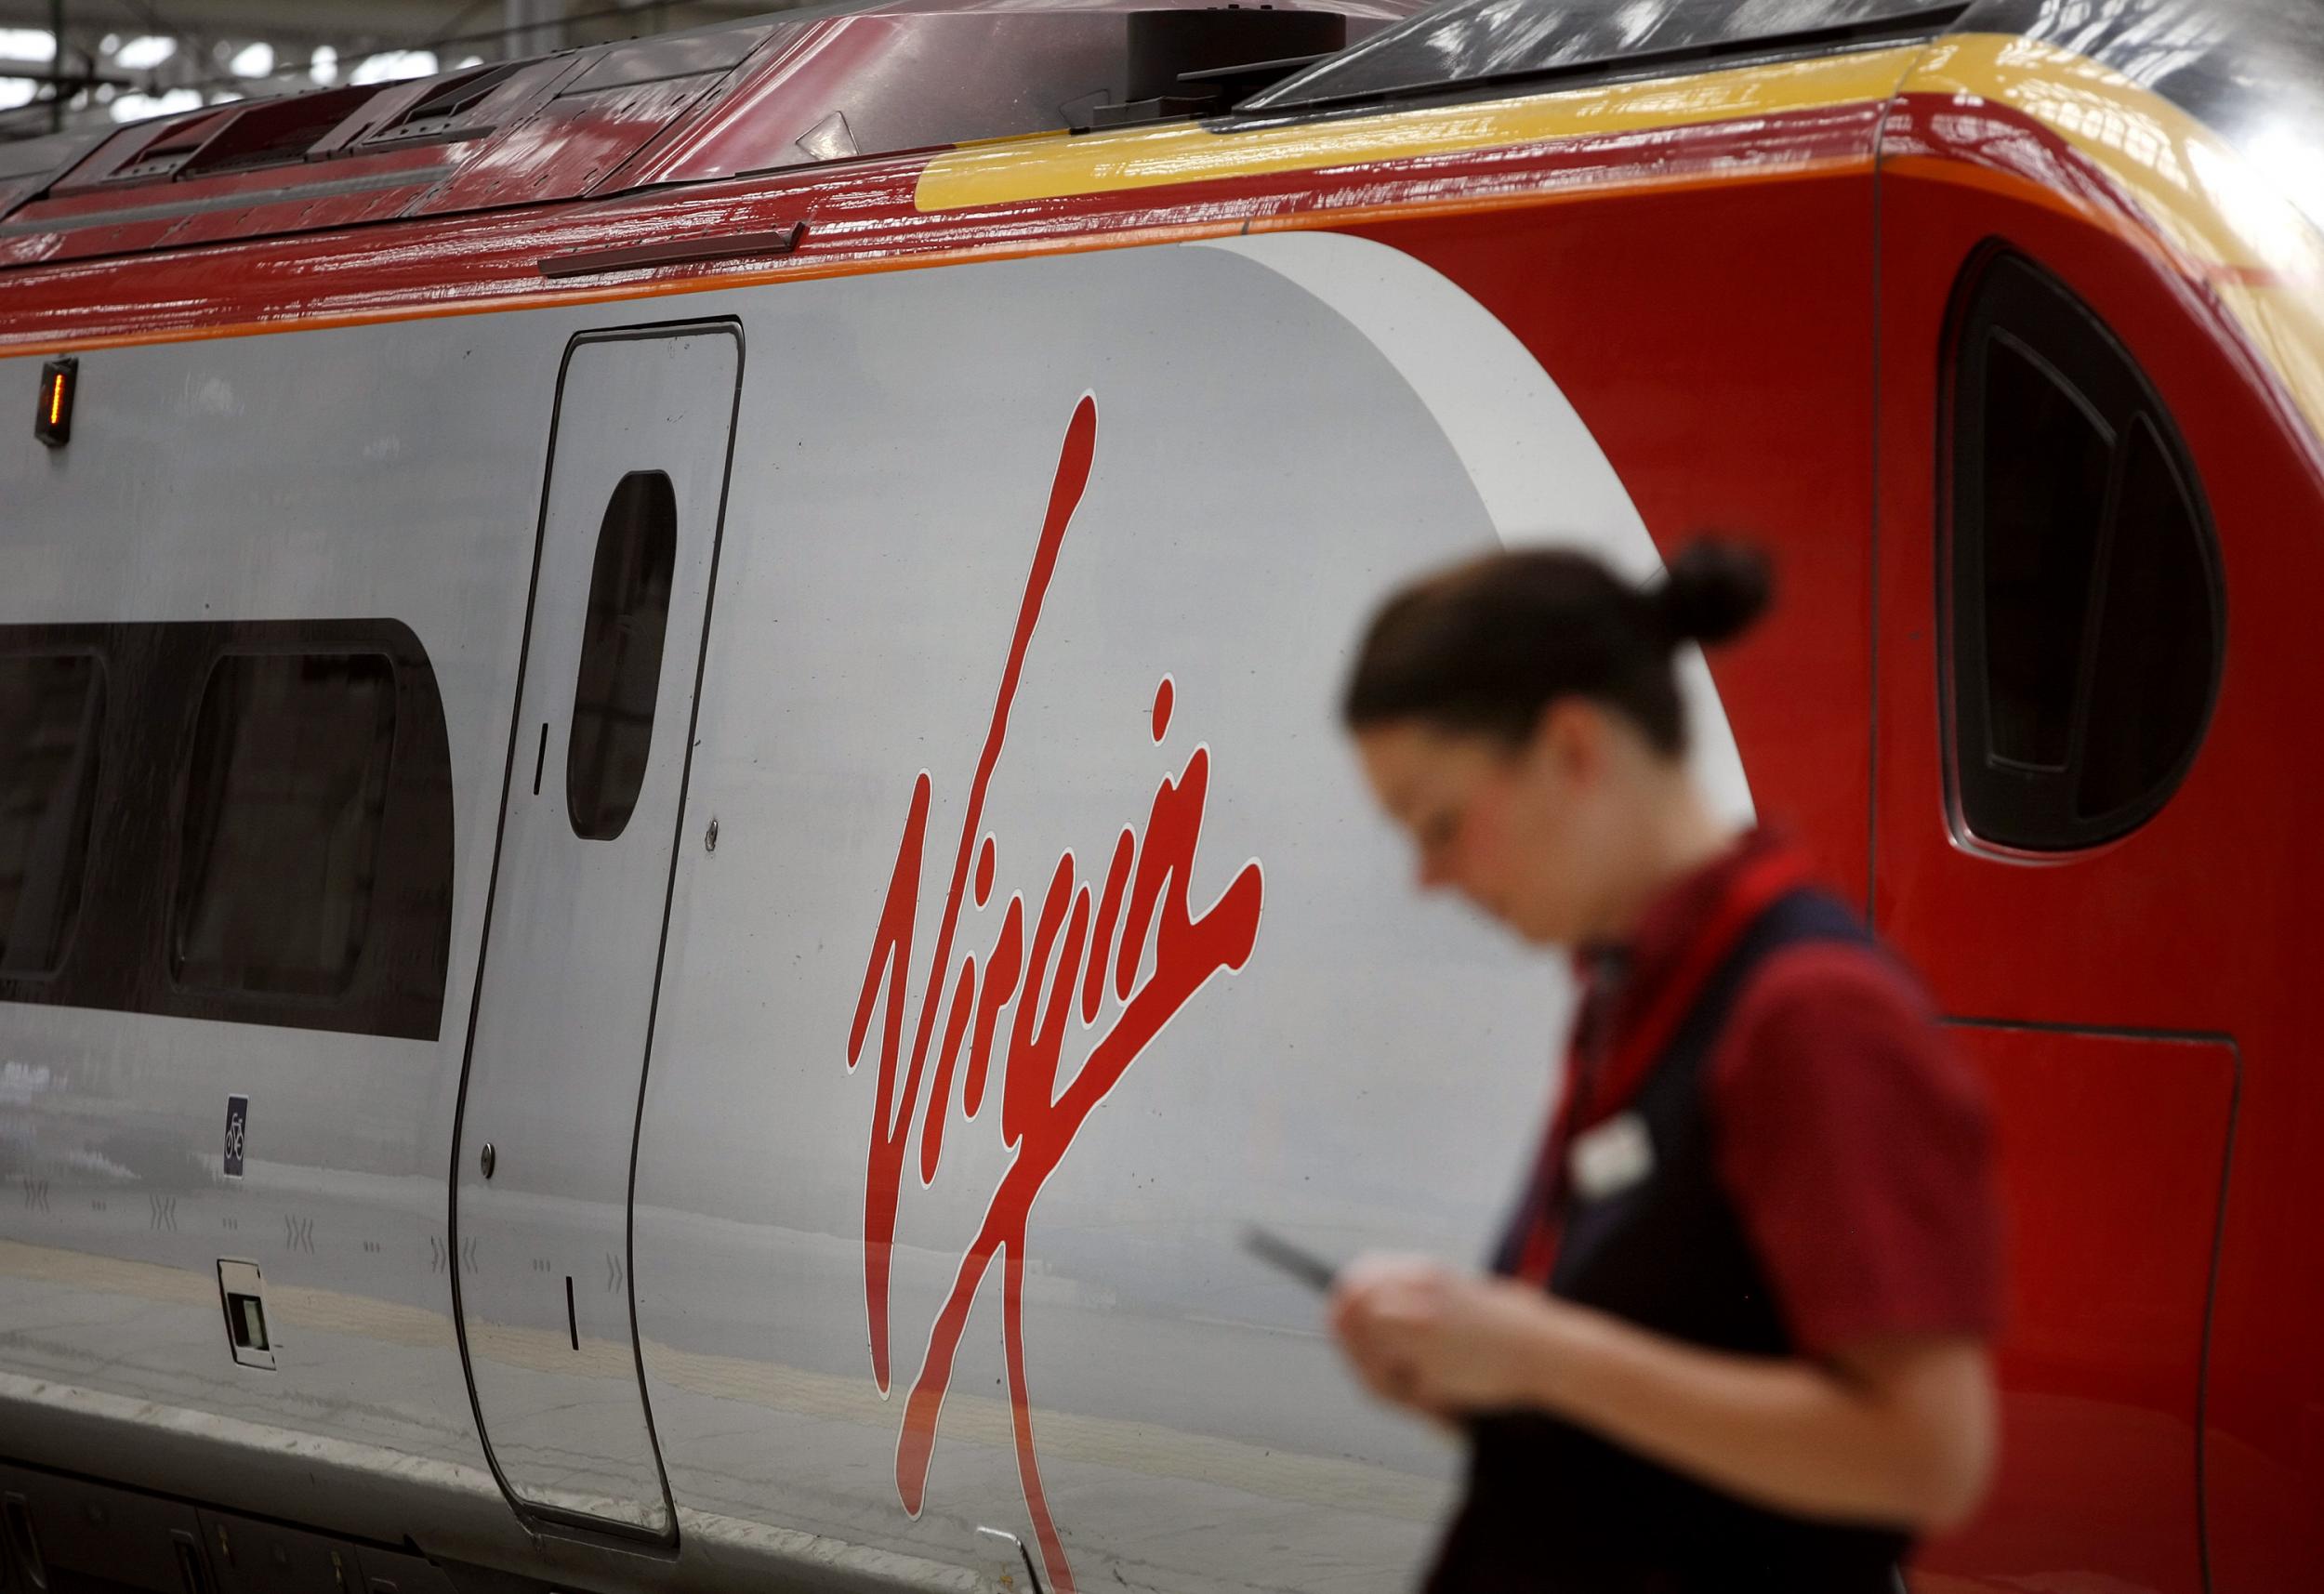 The biggest fare hike was a season ticket on the Virgin Trains route between Birmingham and London Euston